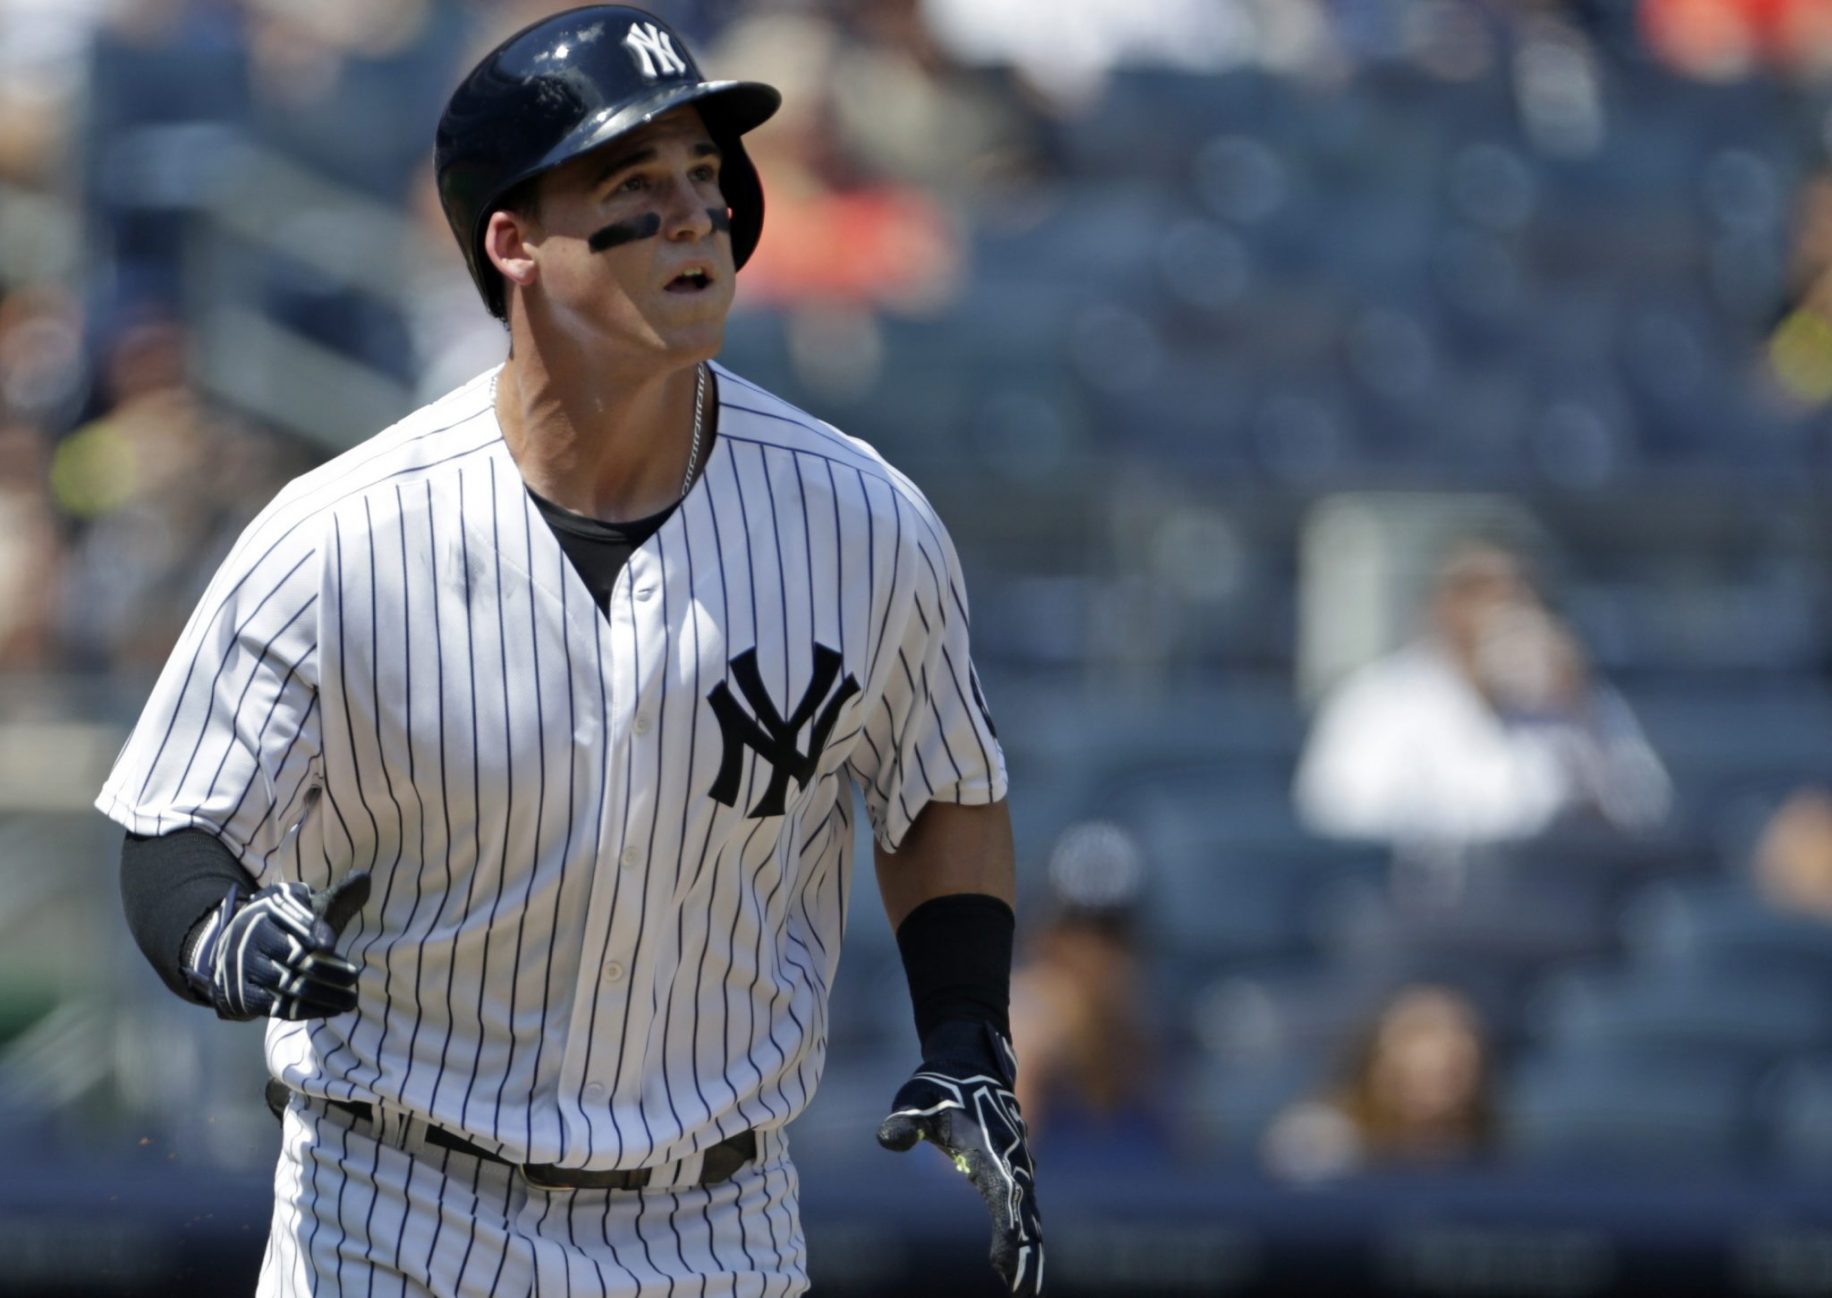 New York Yankees: Tyler Austin gives us a blast from the past (Photo) 